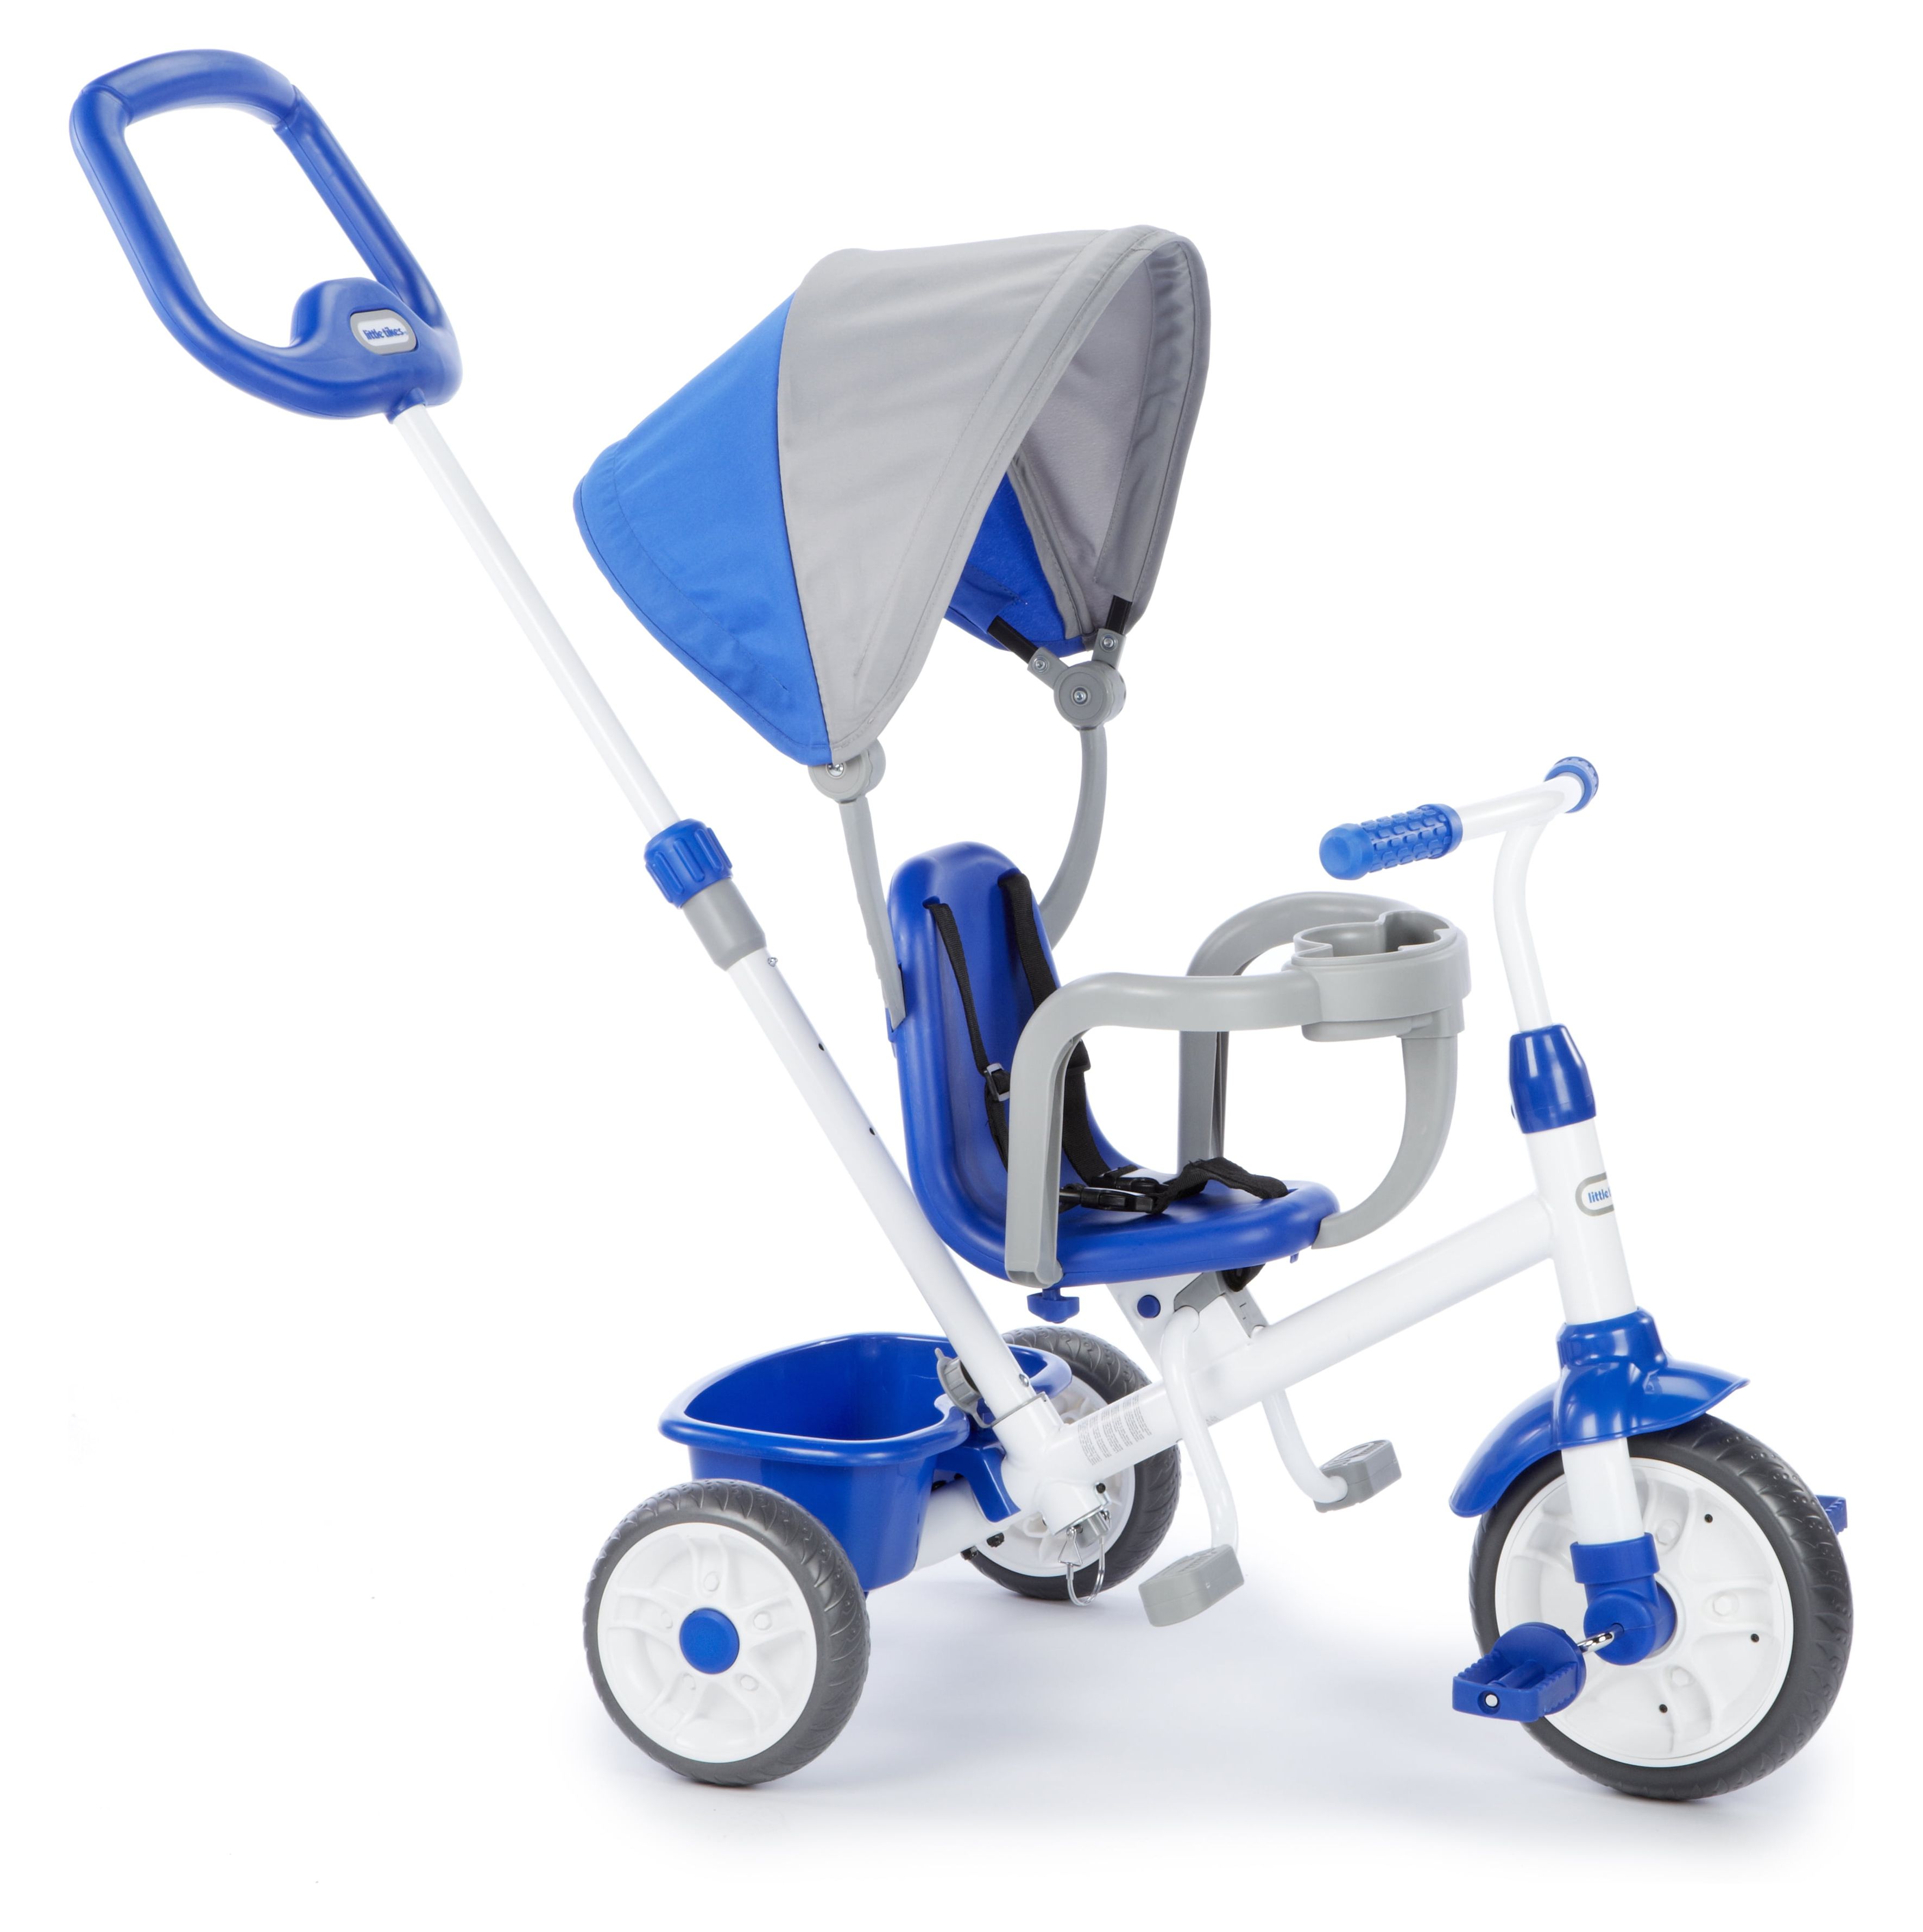 Little Tikes My First Trike 4-in-1 Trike, Blue, Convertible Tricycle, Toddlers w/ 4 Stages of Growth & Shade Canopy, Kids Boys Girls Ages 9 Months to 3 Years - image 1 of 6